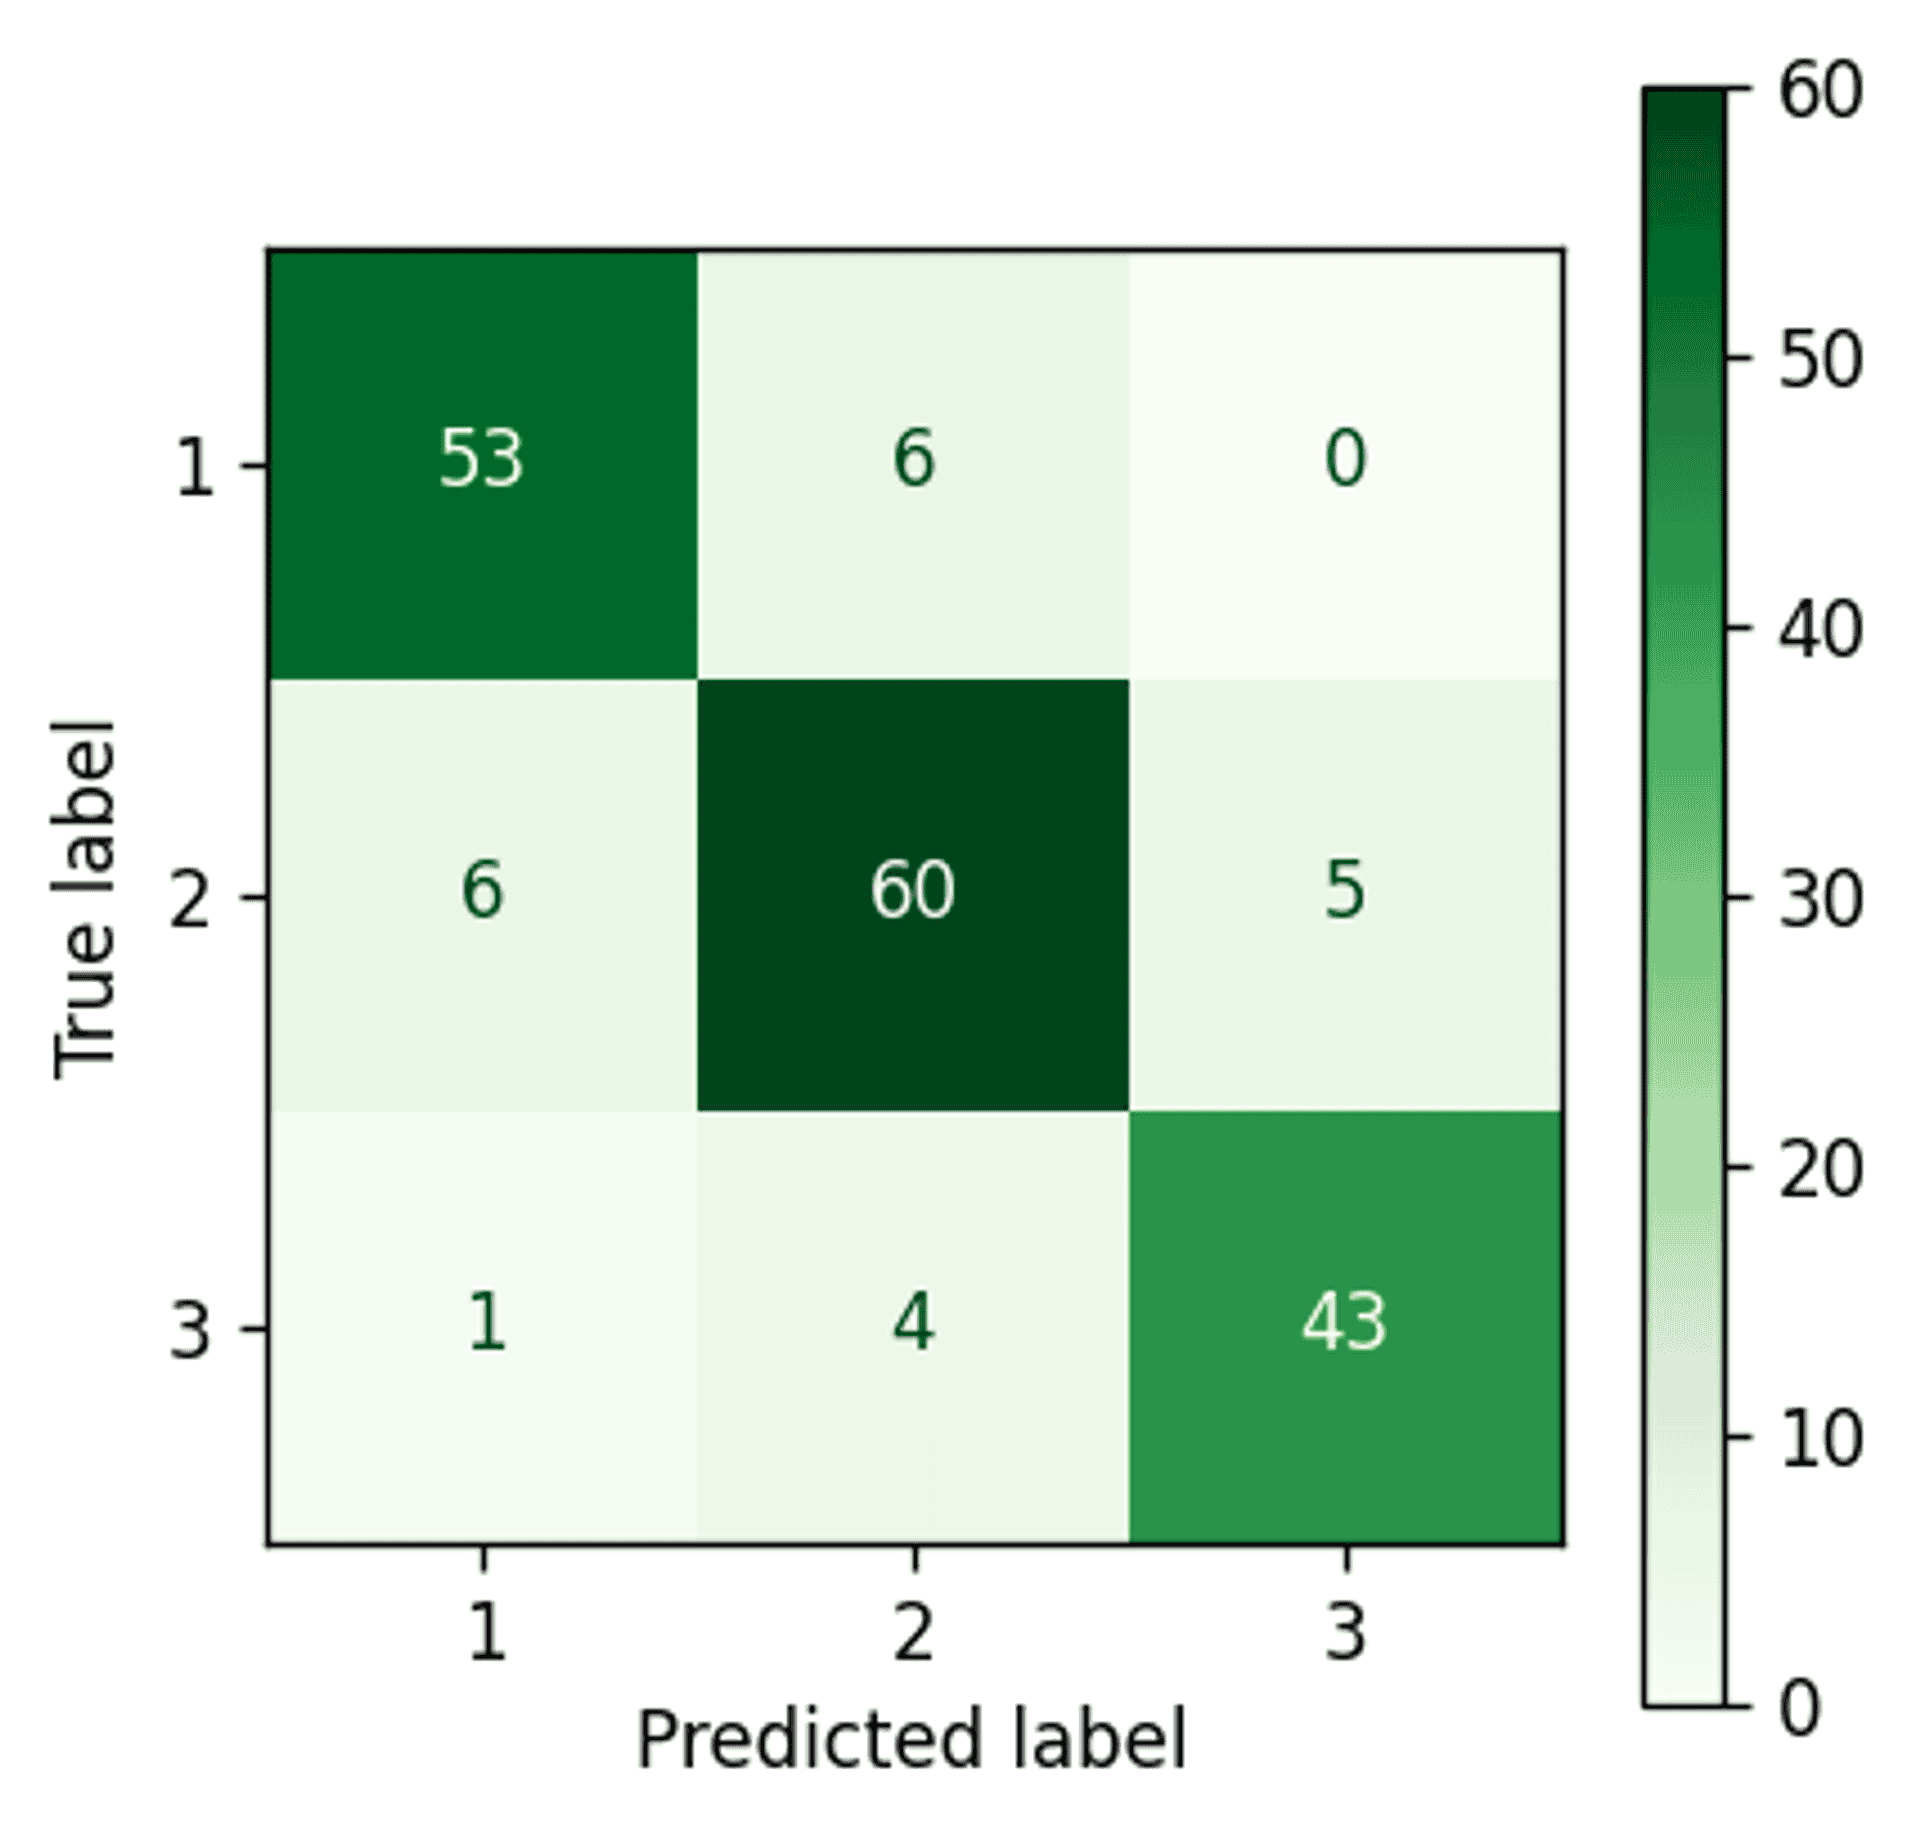 Confusion matrix for the Bayesian Gaussian Mixture Model — Reduced features